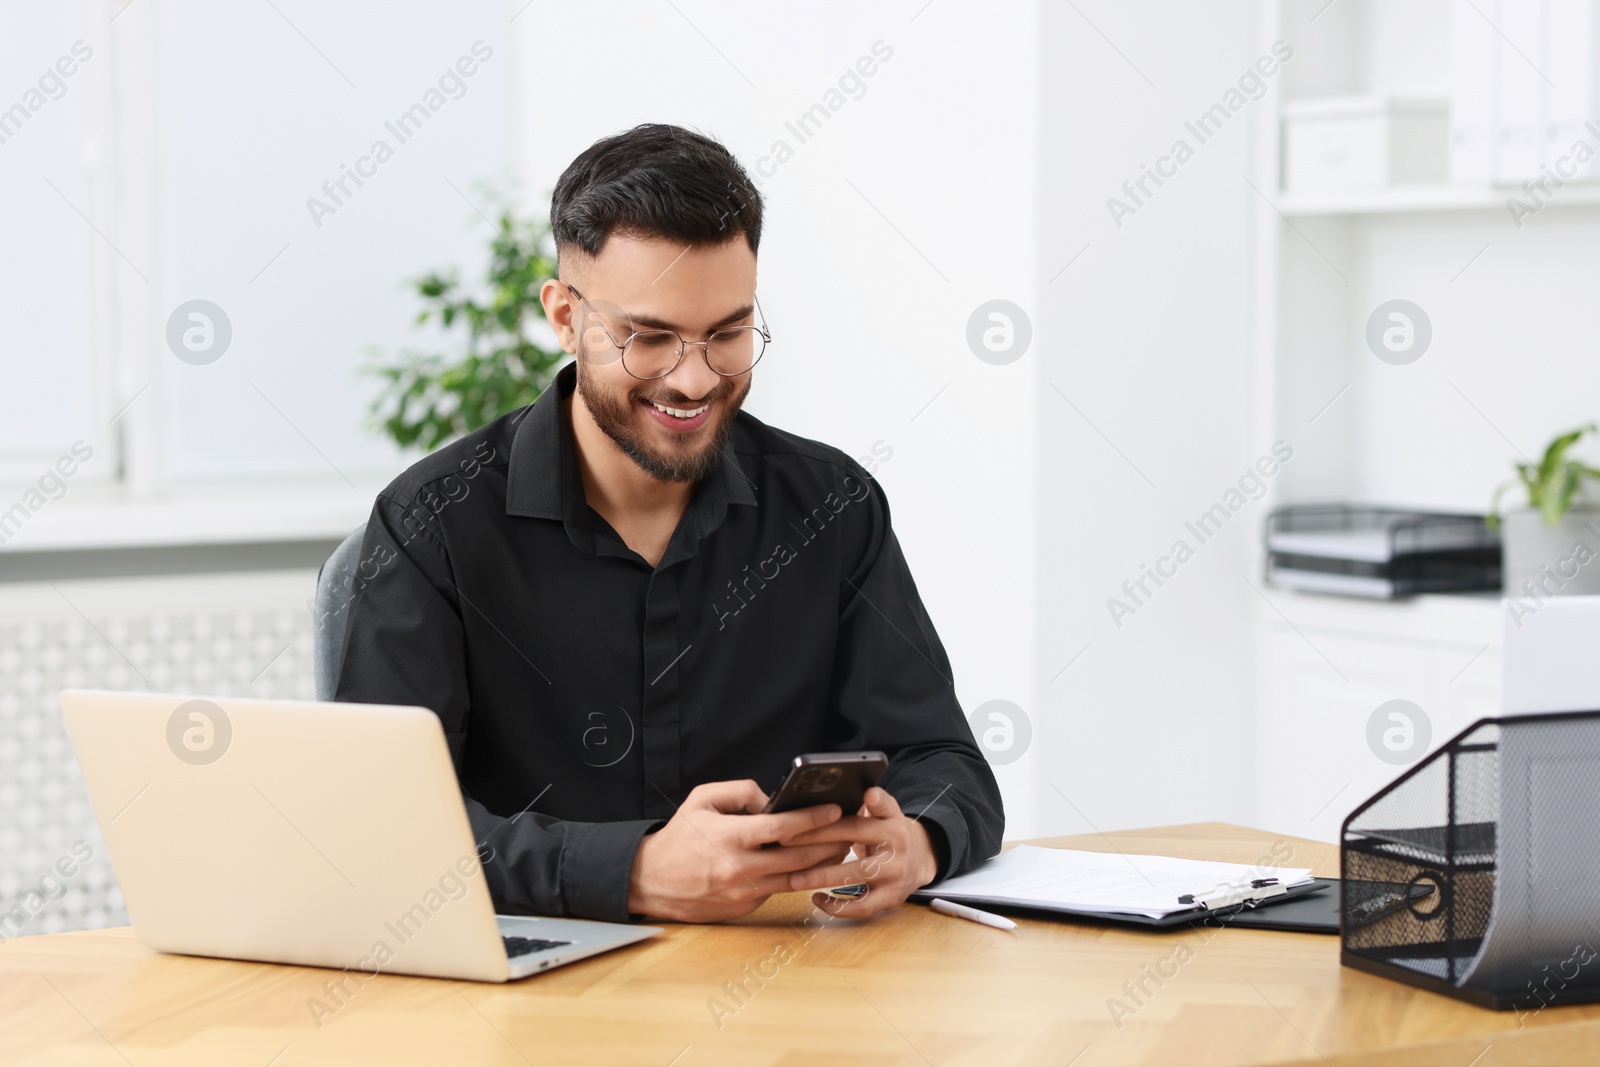 Photo of Handsome young man using smartphone at wooden table in office